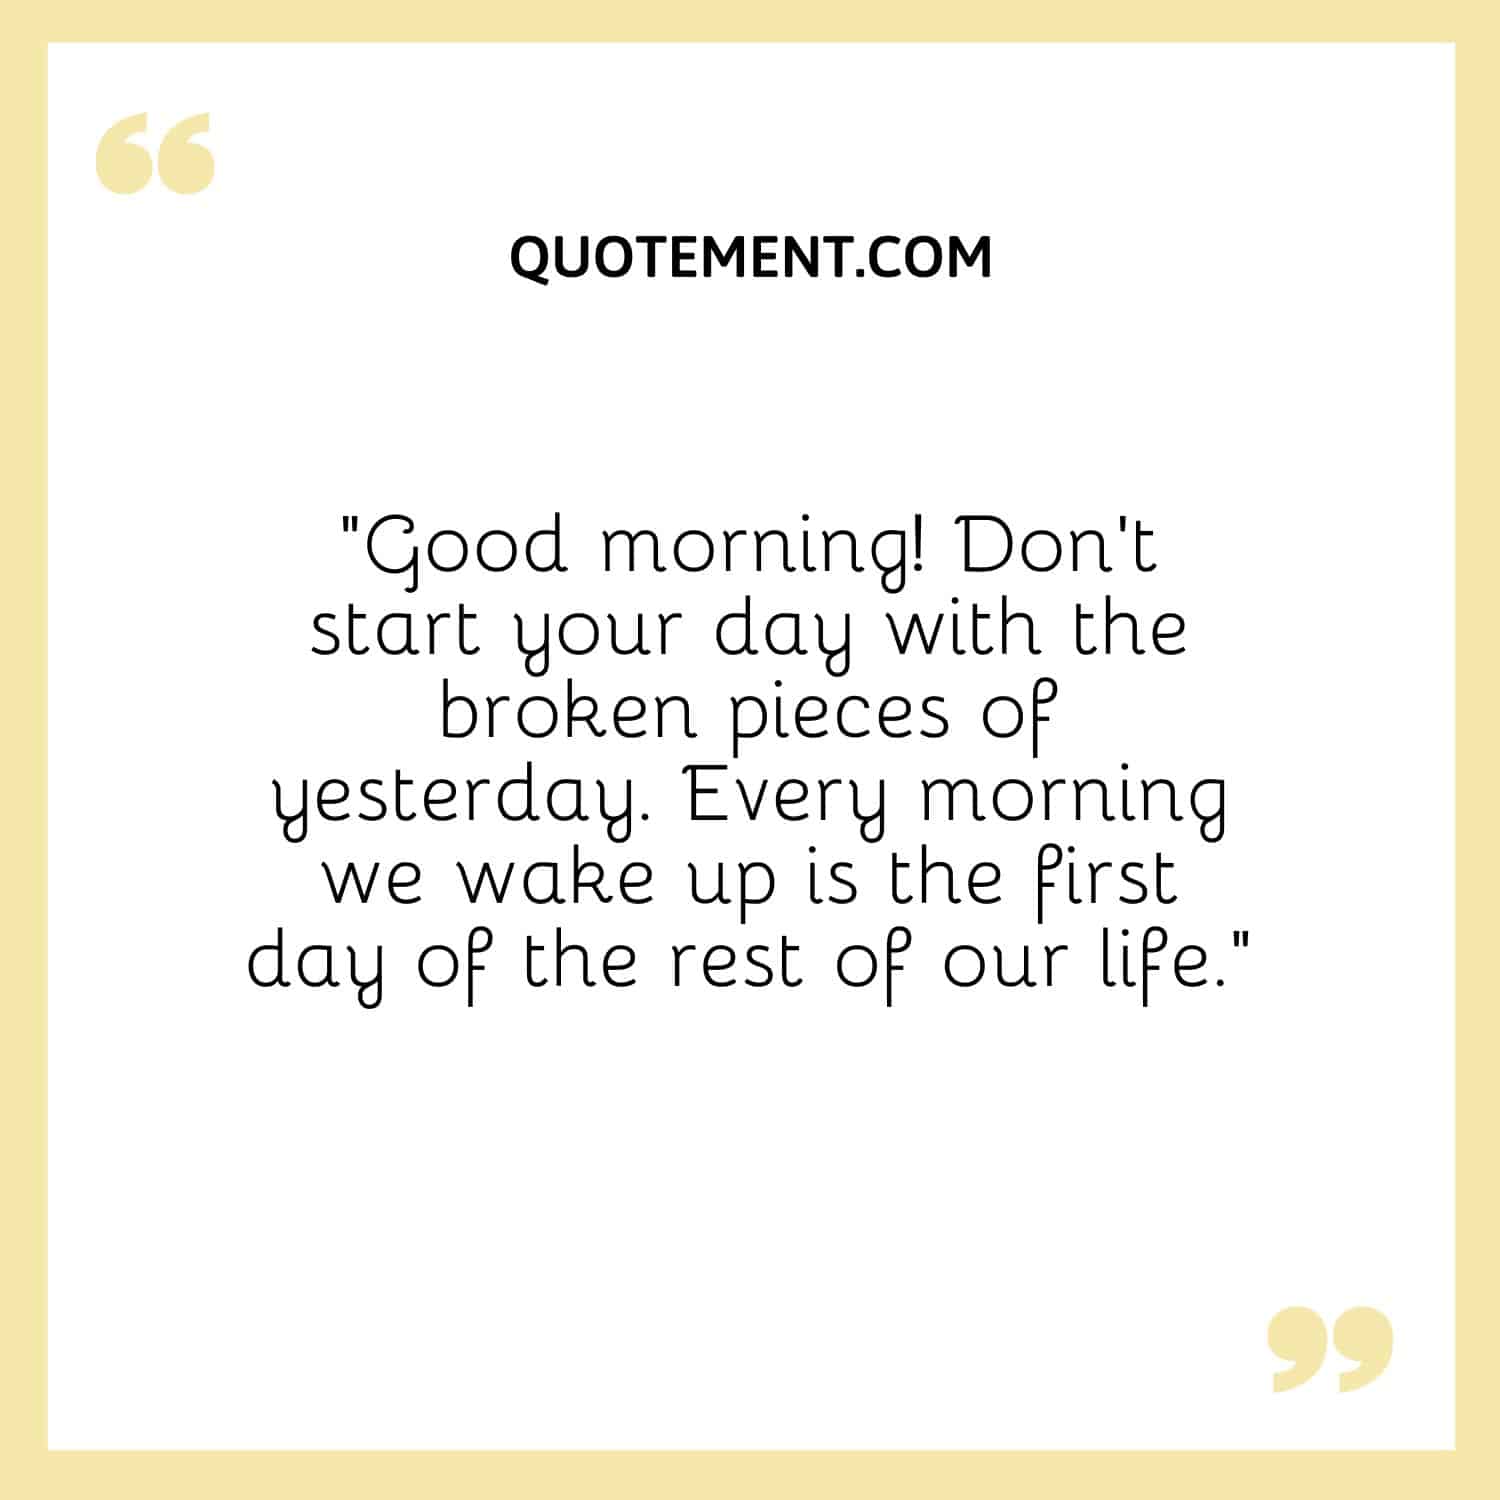 Don’t start your day with the broken pieces of yesterday